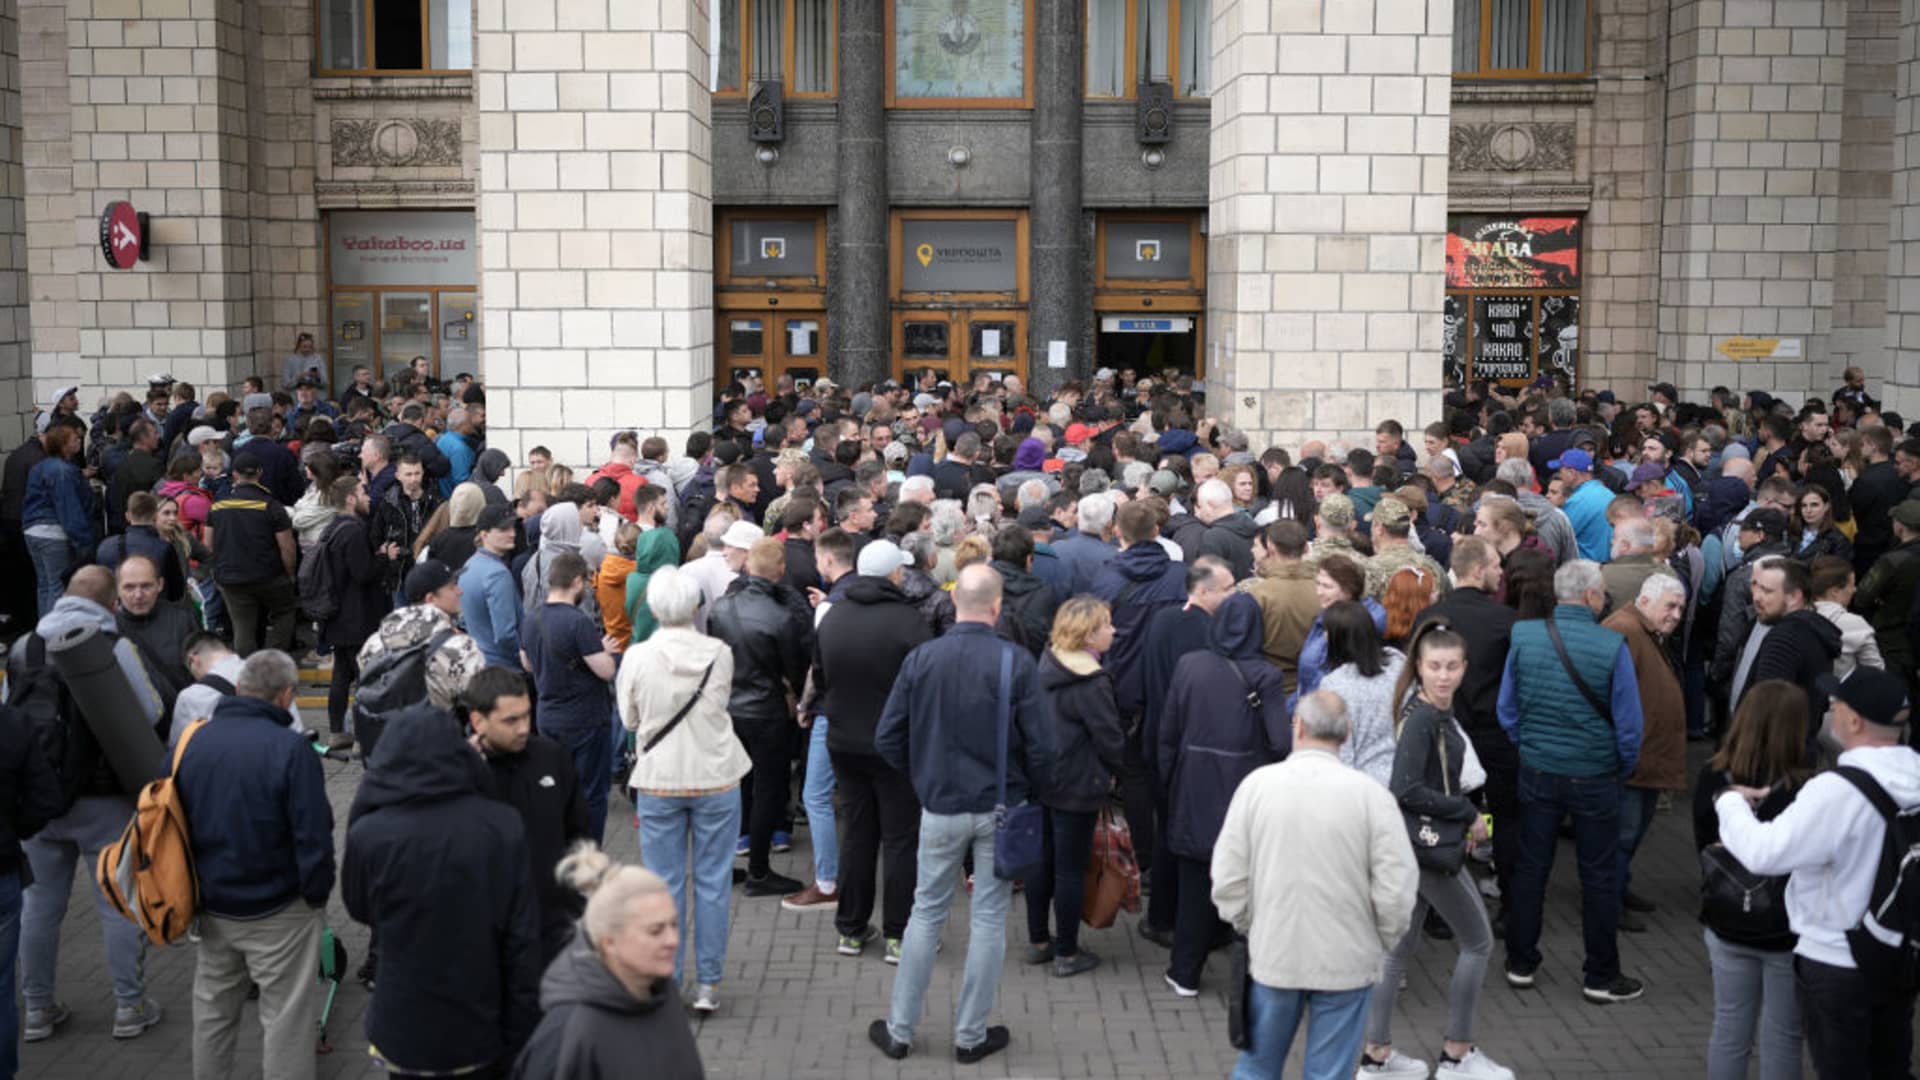 Hundreds of people queue at Kyiv central post office for a new Ukrainian postal service stamp marking the sinking of Russian warship Moskva on May 23, 2022 in Kyiv, Ukraine.